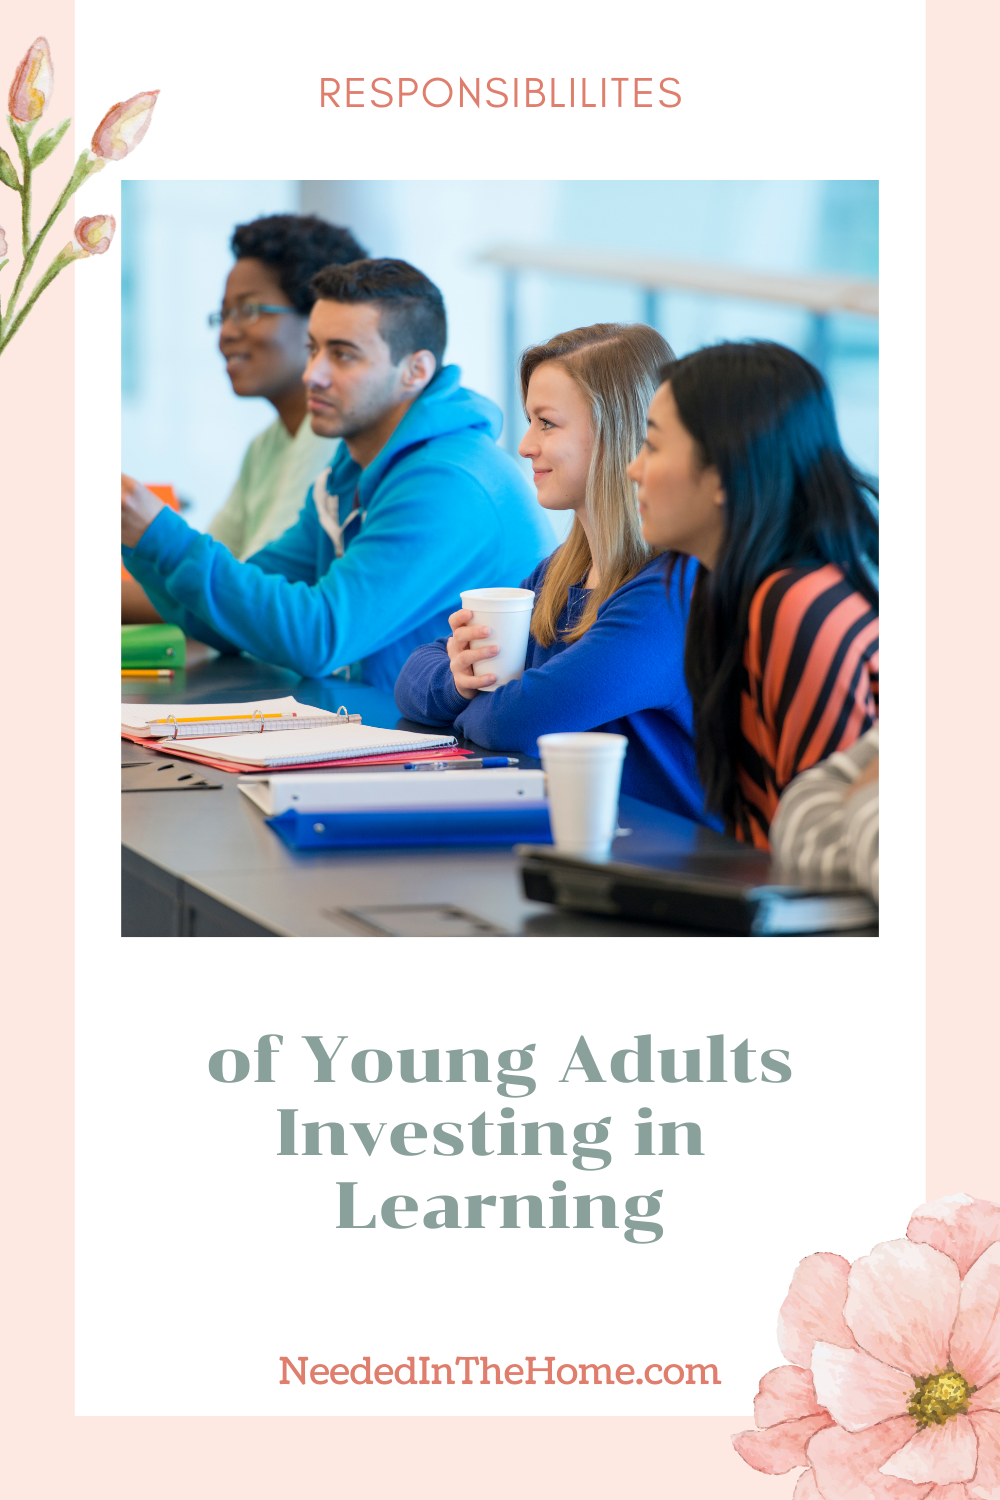 pinterest-pin-description responsibilities of young adults investing in learning neededinthehome